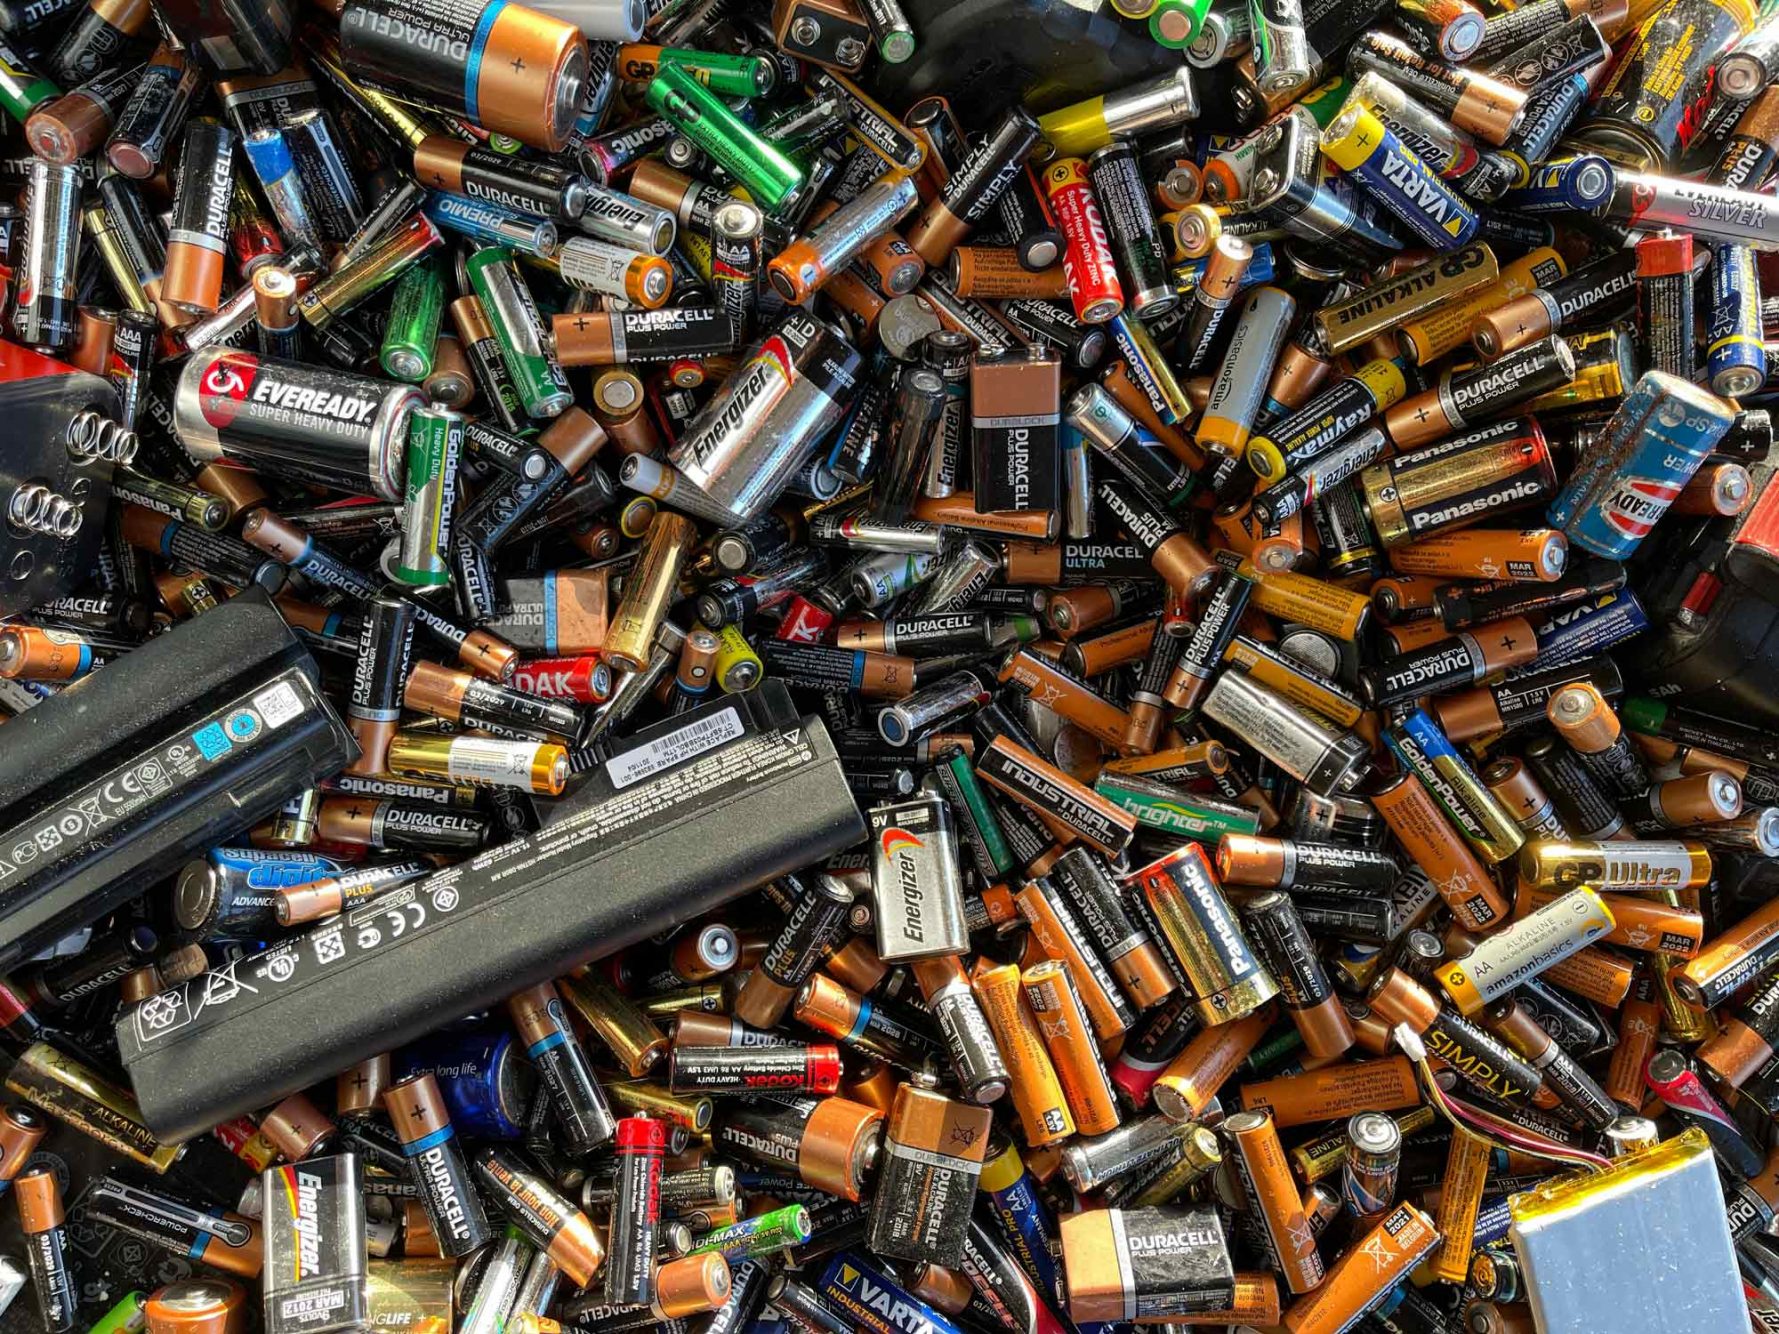 Battery repair instead of throwing it away: how to reduce the mountain of waste